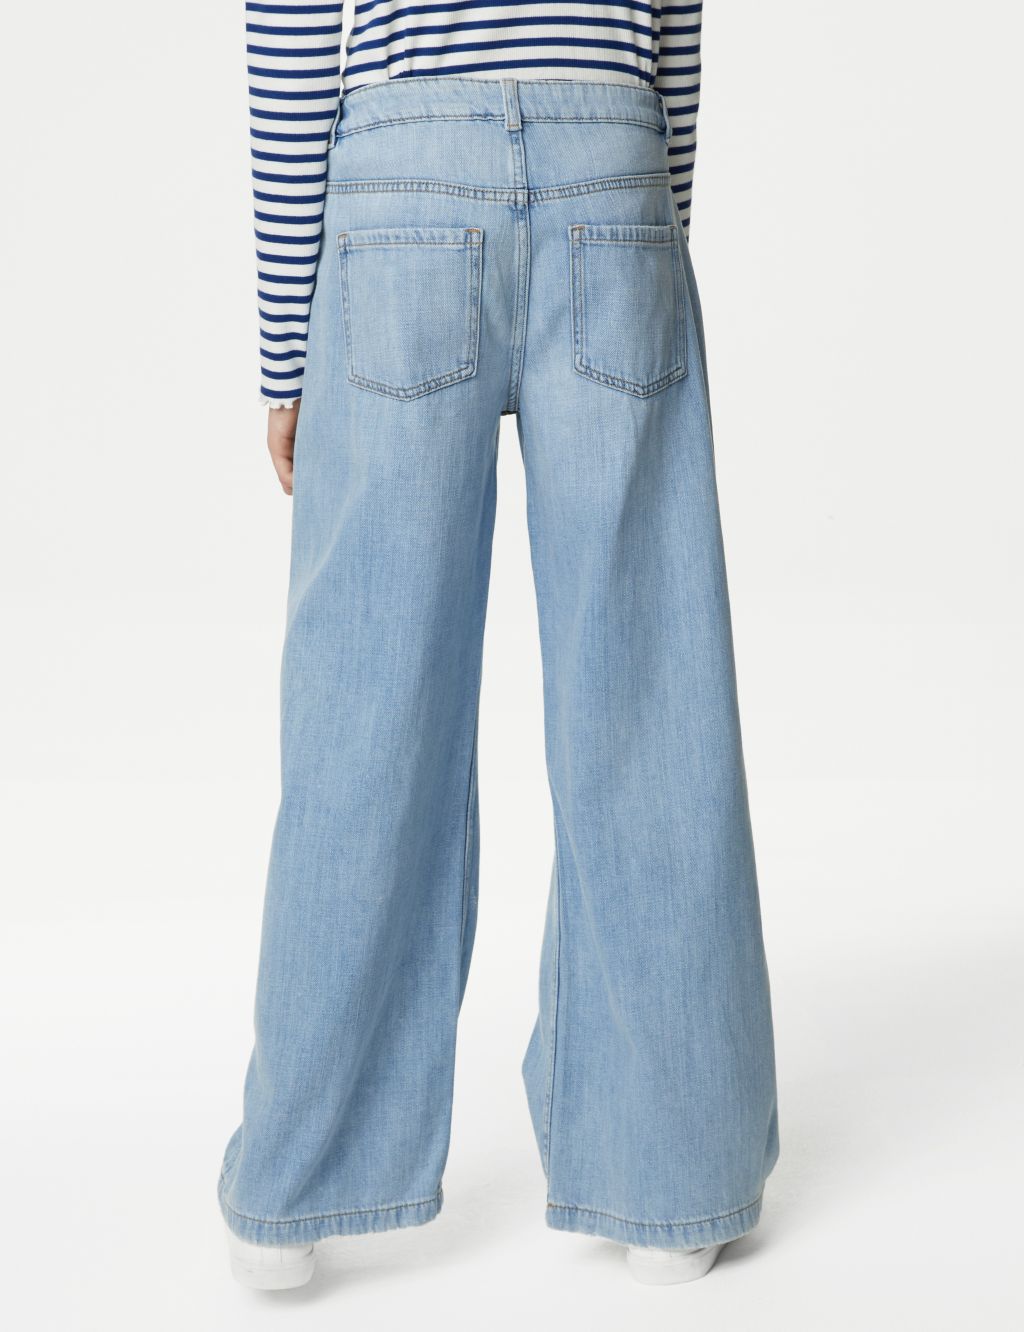 90's Baggy Low Rise Denim Cargo Jeans (6-16 Yrs) image 5